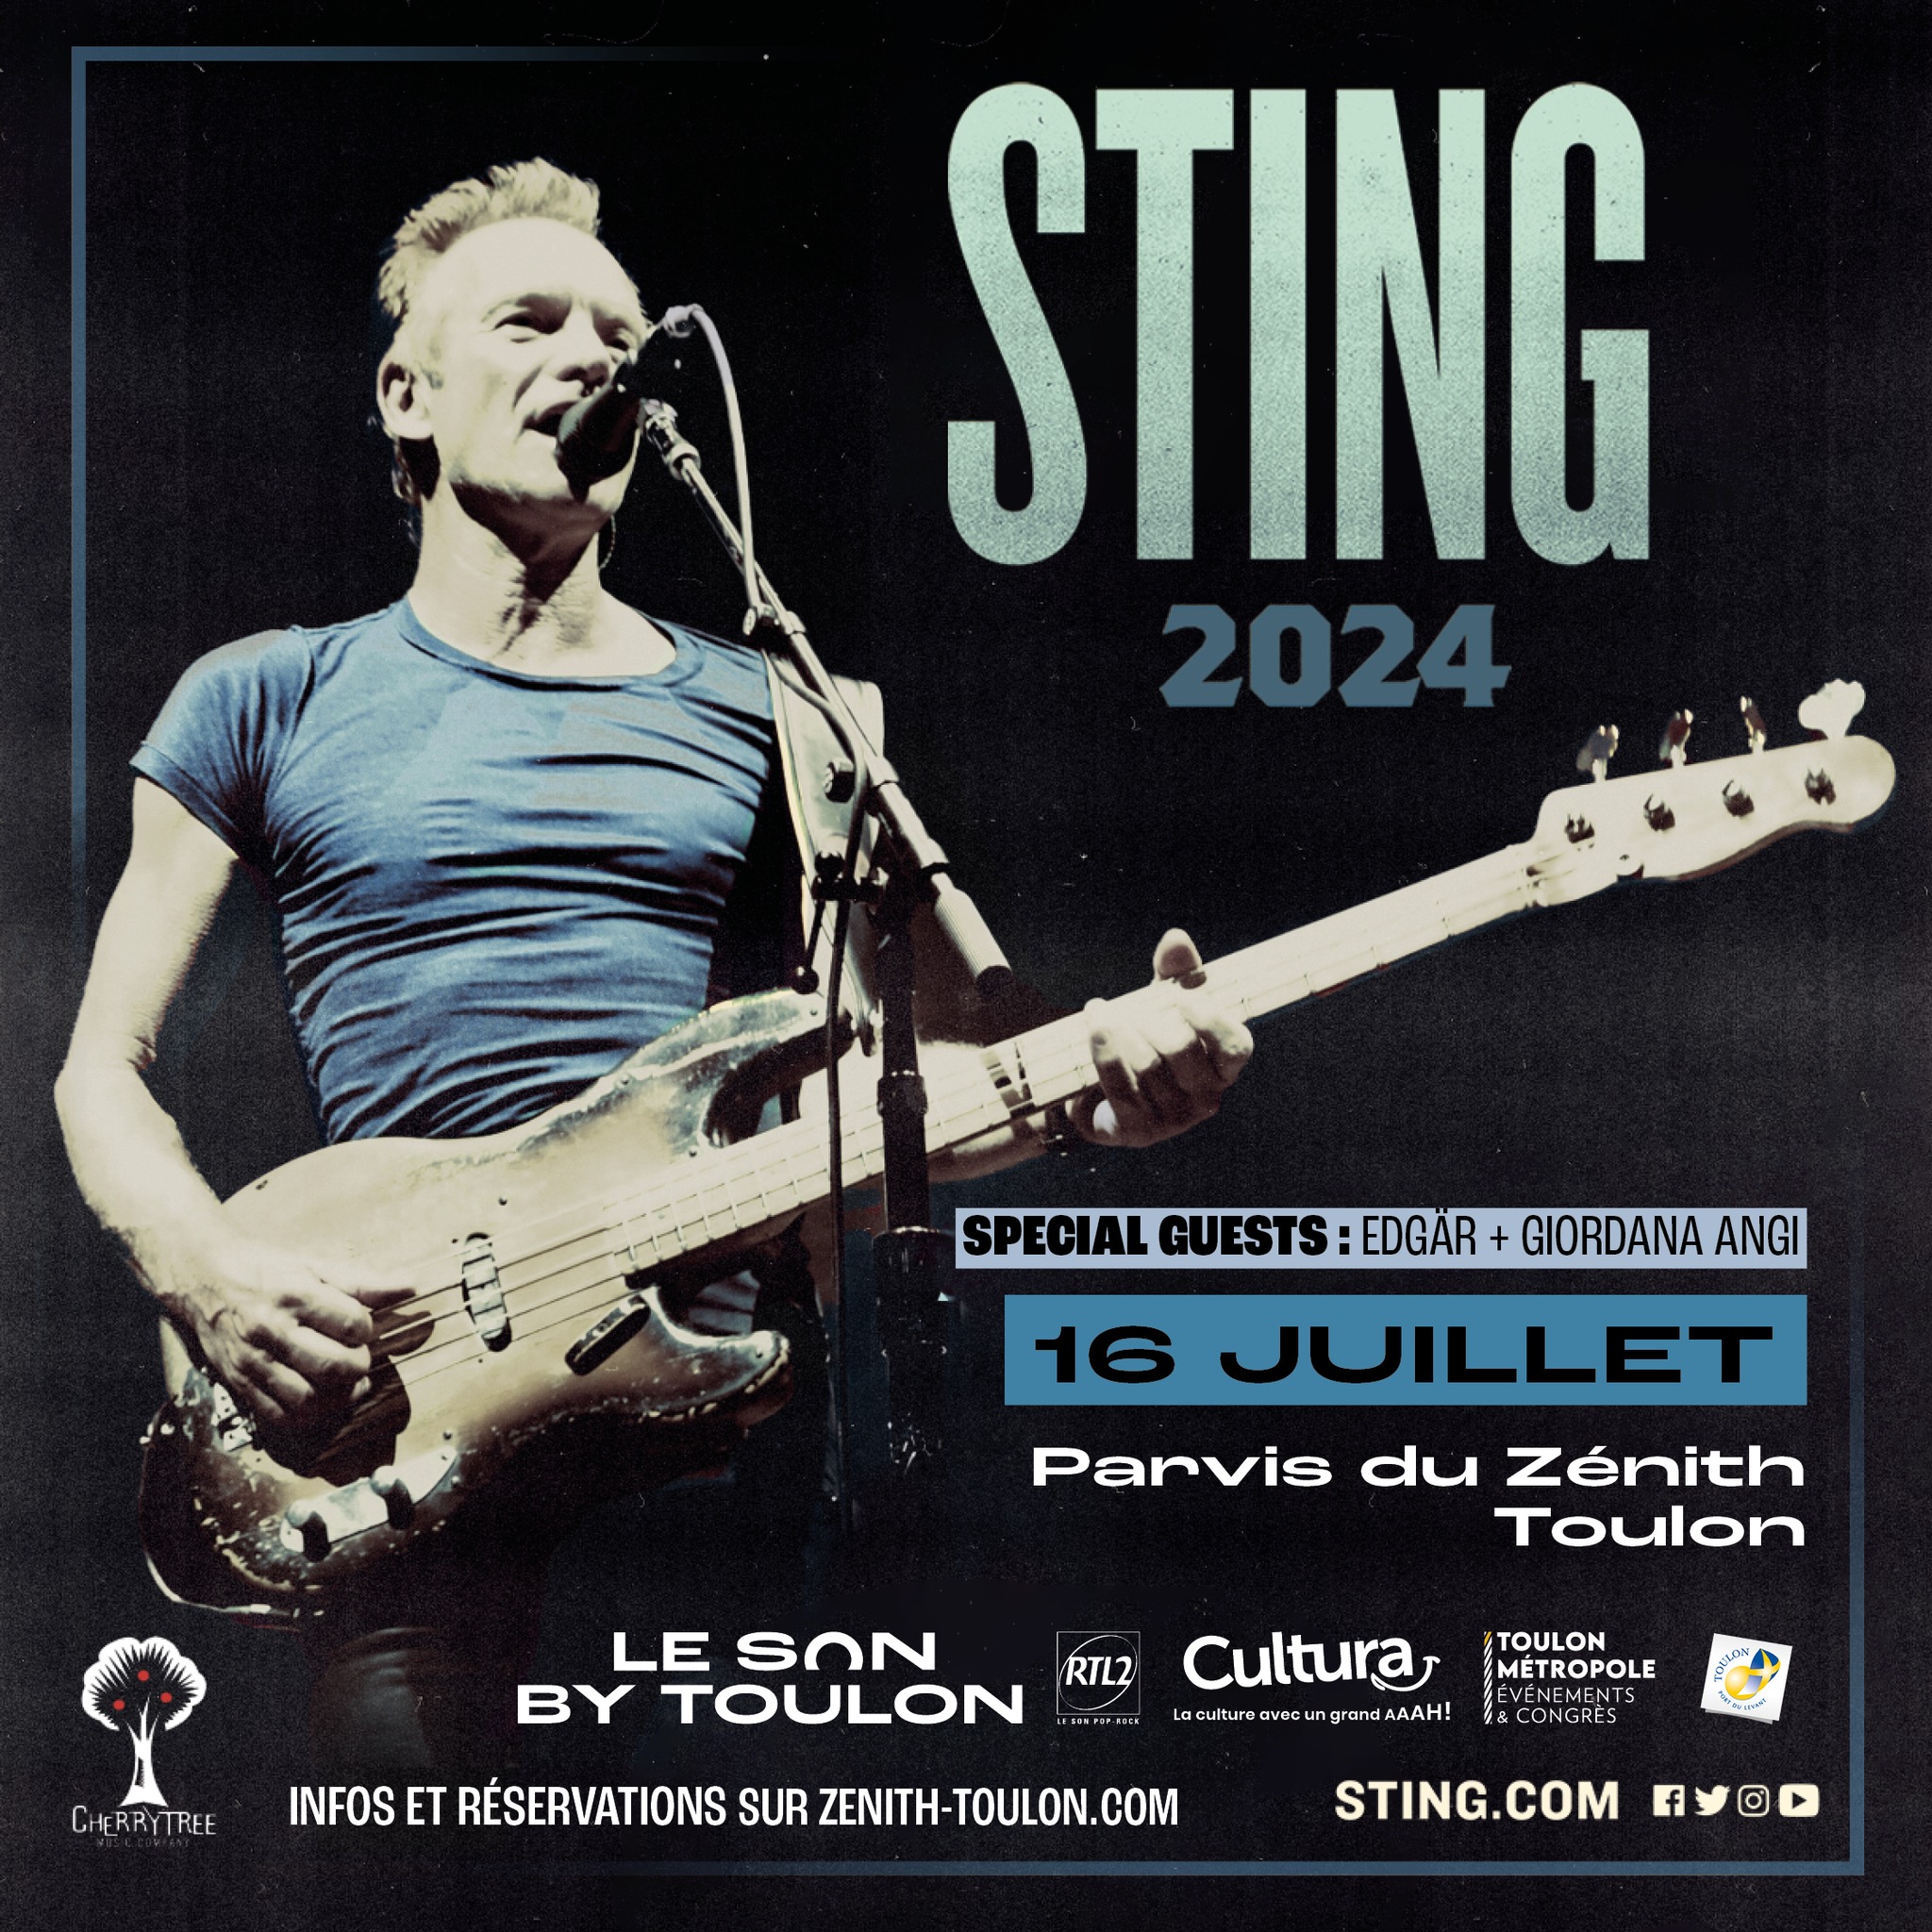 Sting at Zenith Omega Toulon Tickets